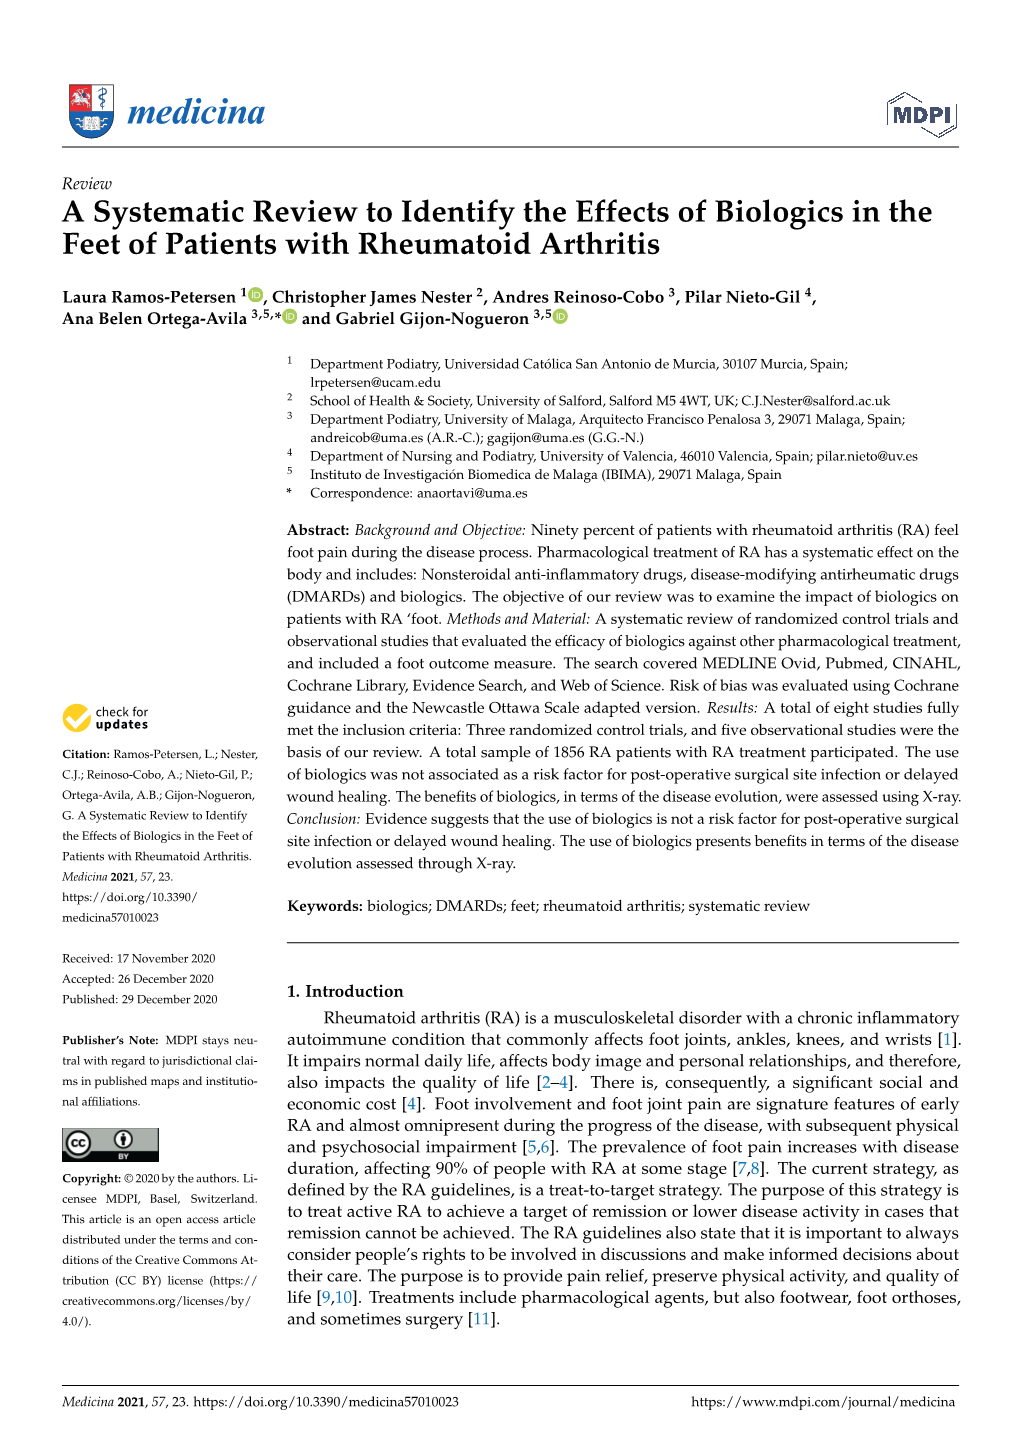 A Systematic Review to Identify the Effects of Biologics in the Feet of Patients with Rheumatoid Arthritis